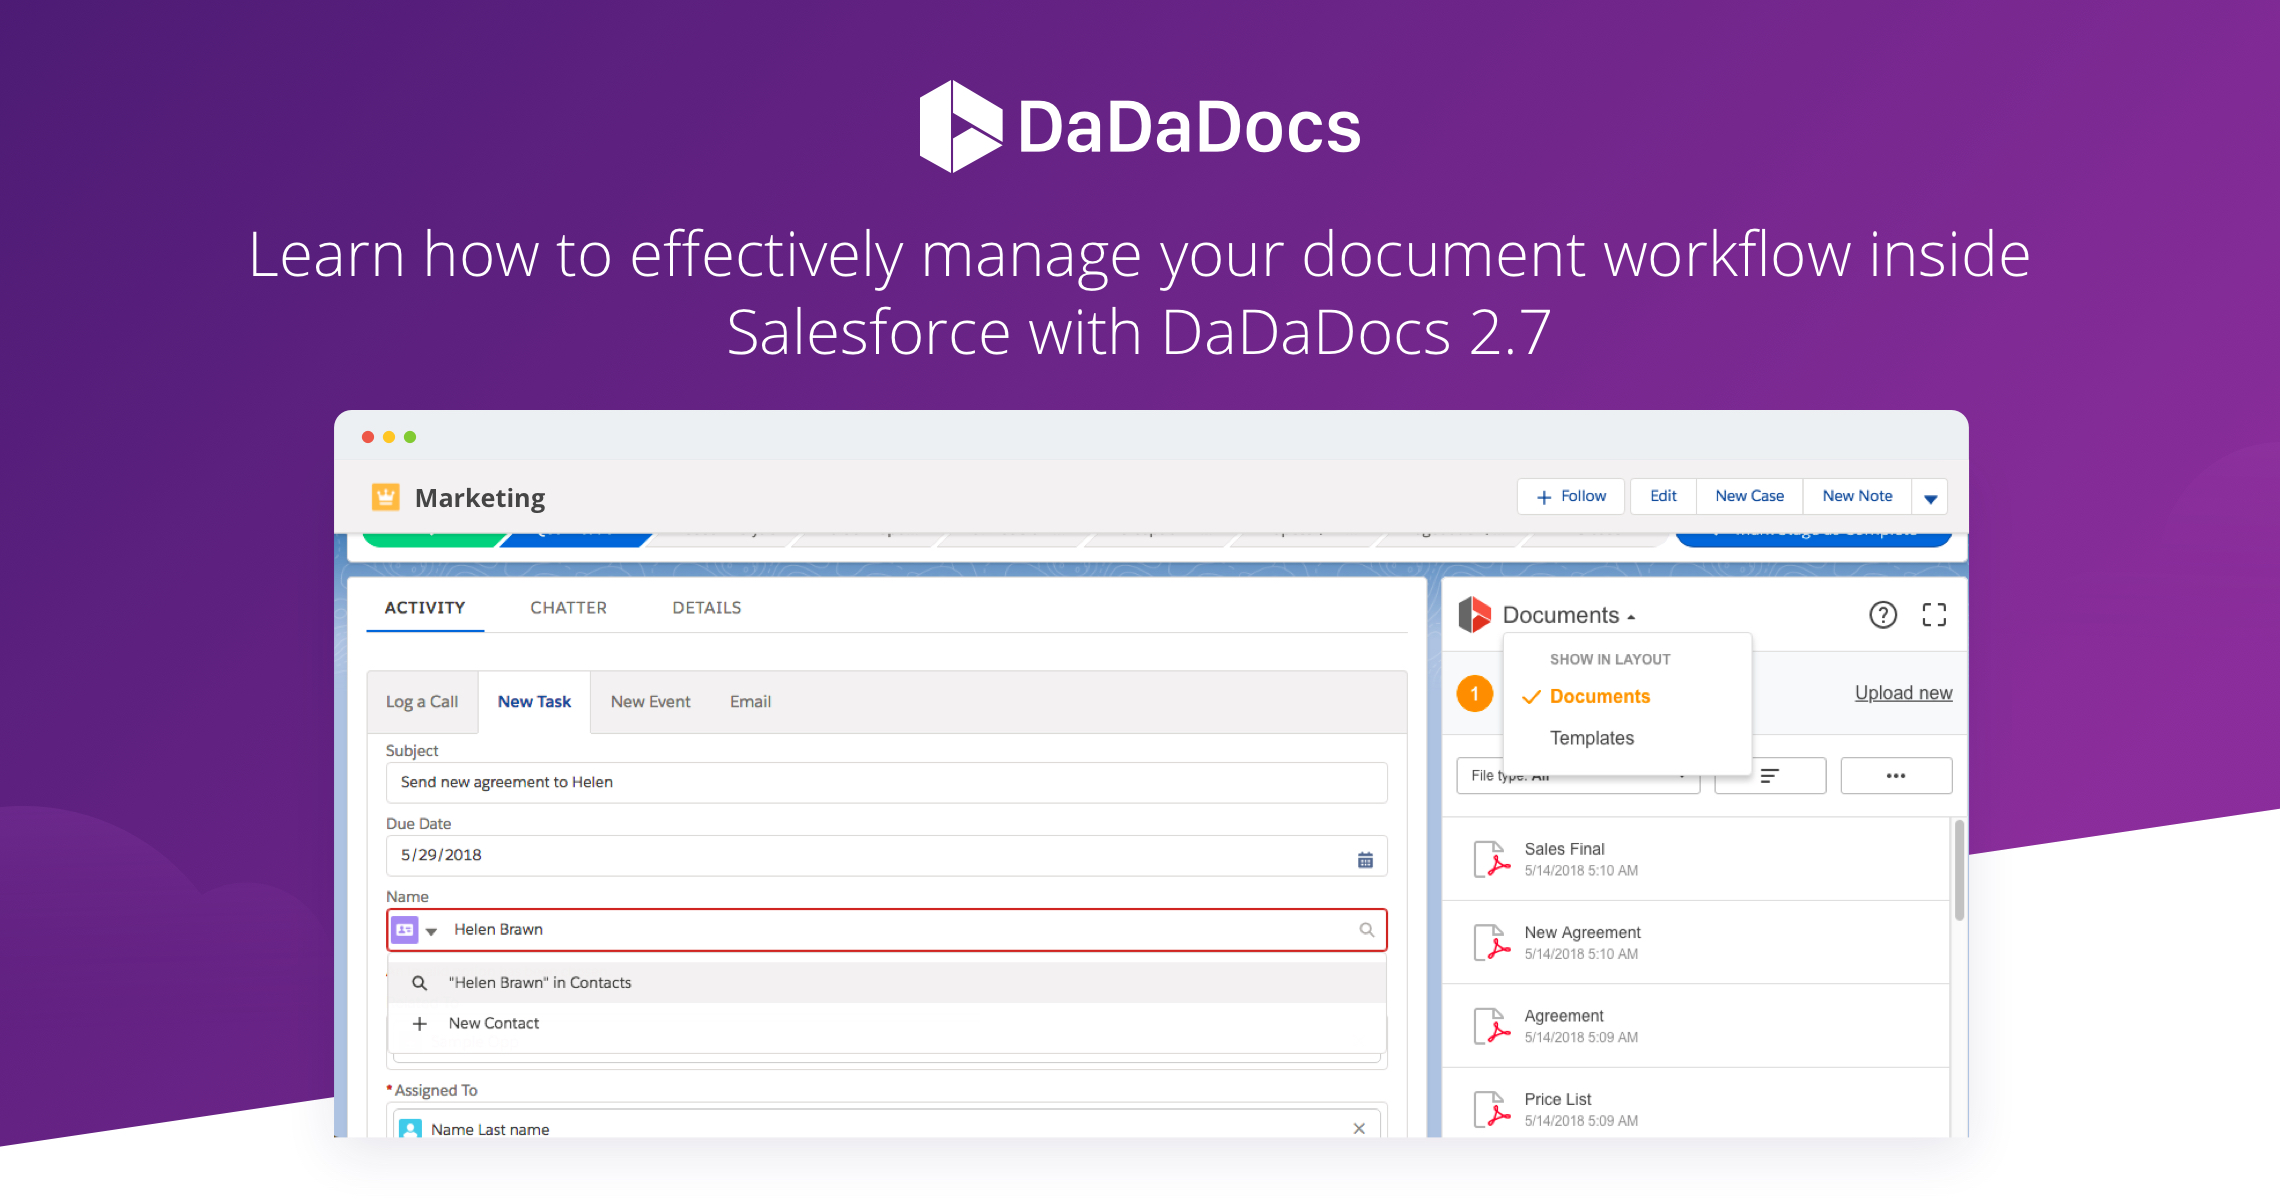 digital workflow, e-signature for Salesforce, Salesforce World Tour, pdf editor for Salesforce, Lightning experience, document lifecycle, data collection for Salesforce, DaDaDocs, PDFfiller